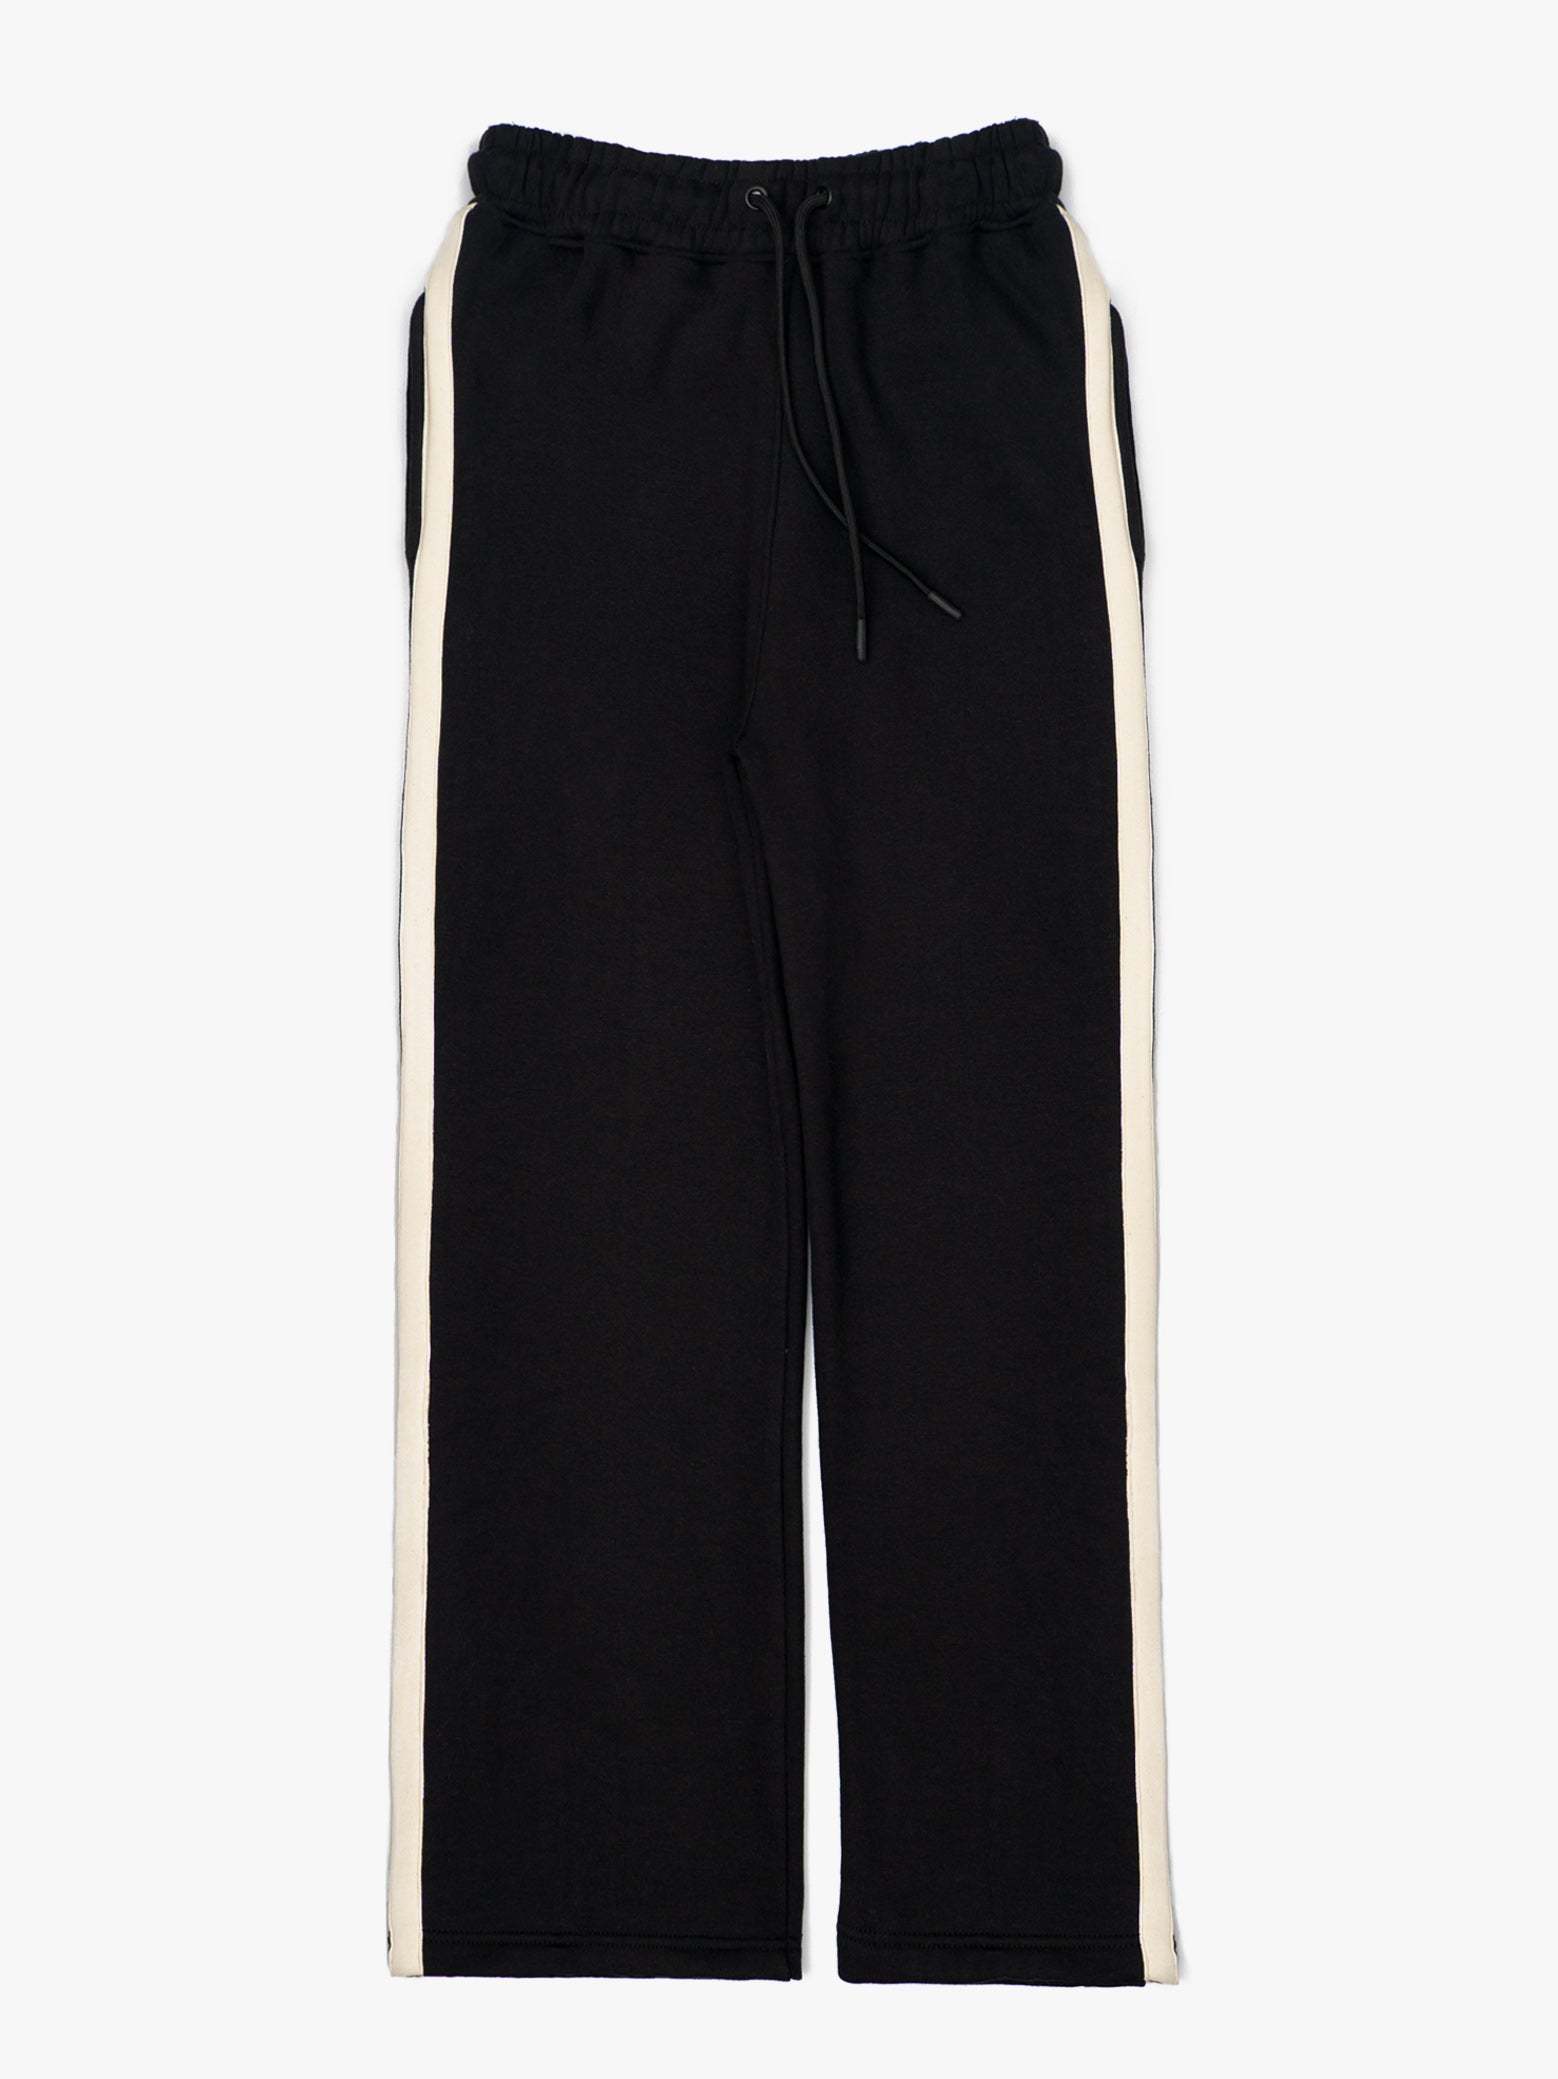 Black Striped Trousers (Winters)